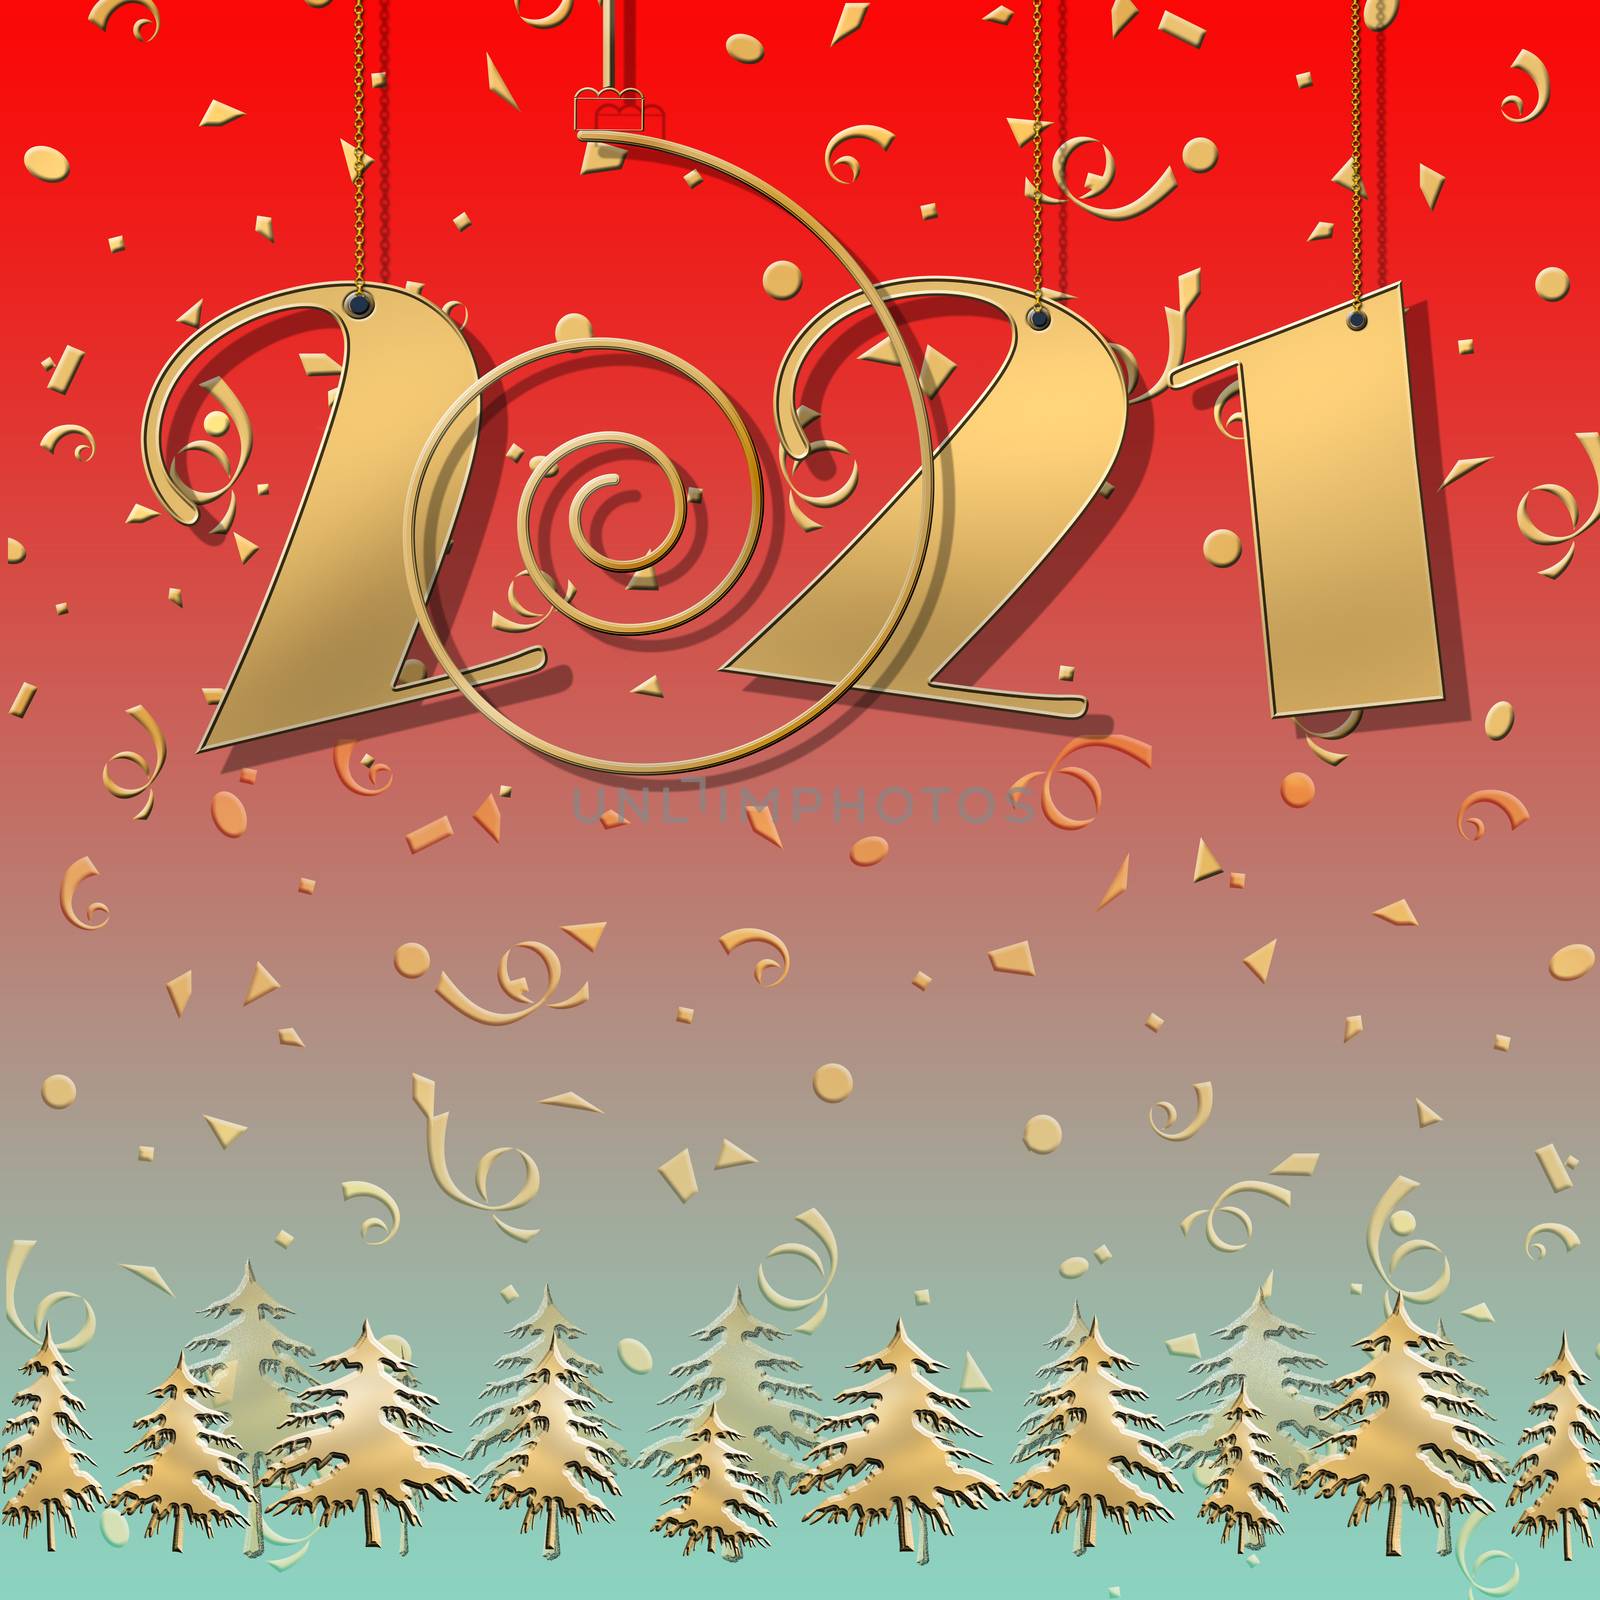 Luxury Happy new year 2021 gold card with hanging 2021 digits with confetti on red background with gold christmas trees. Banner, greeting cards, brochure, print. Copy space, mock up. 3D illustration